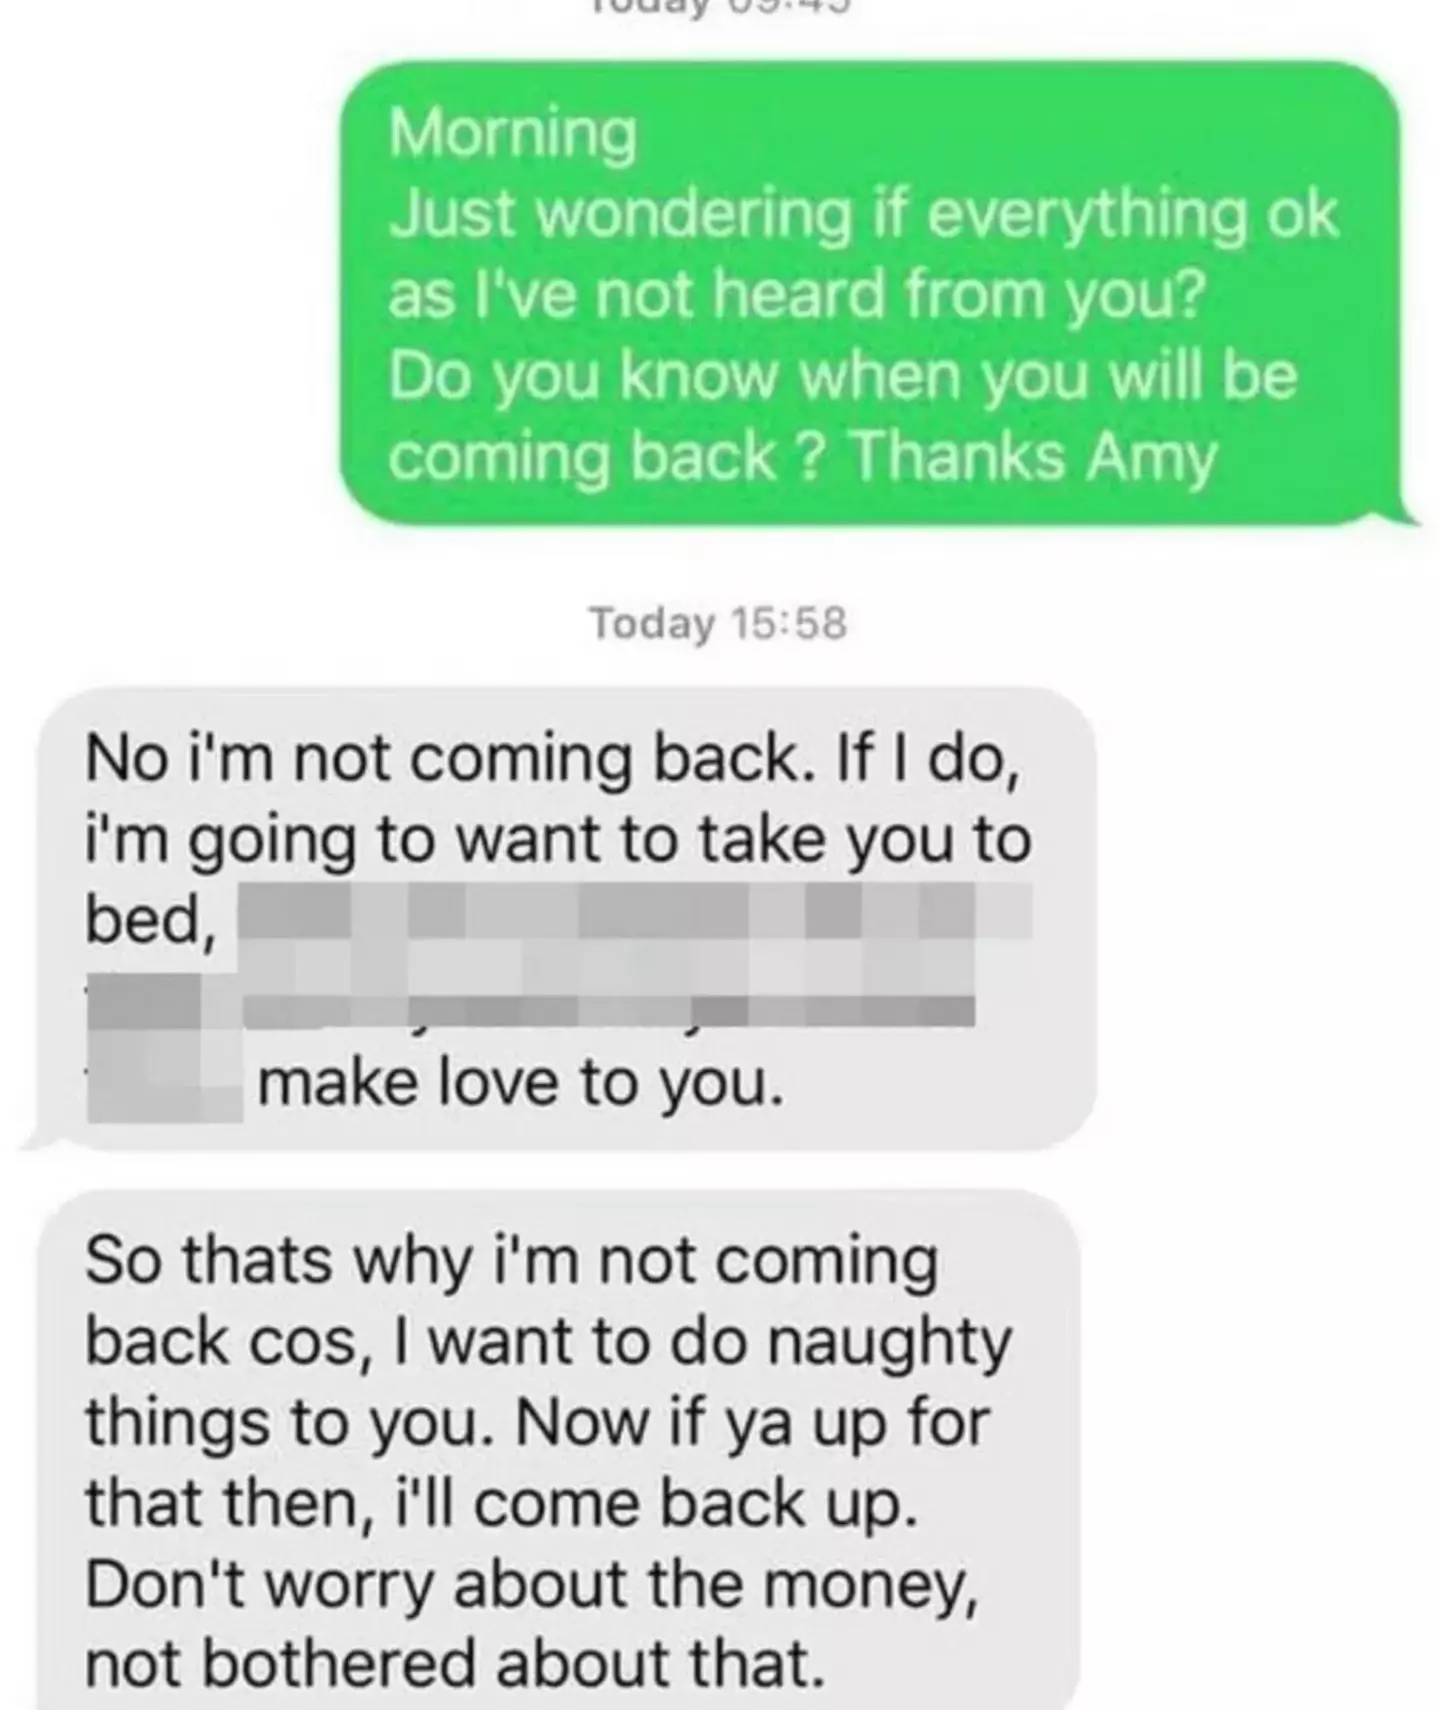 The plasterer disappeared before sending Amy the creepy messages.